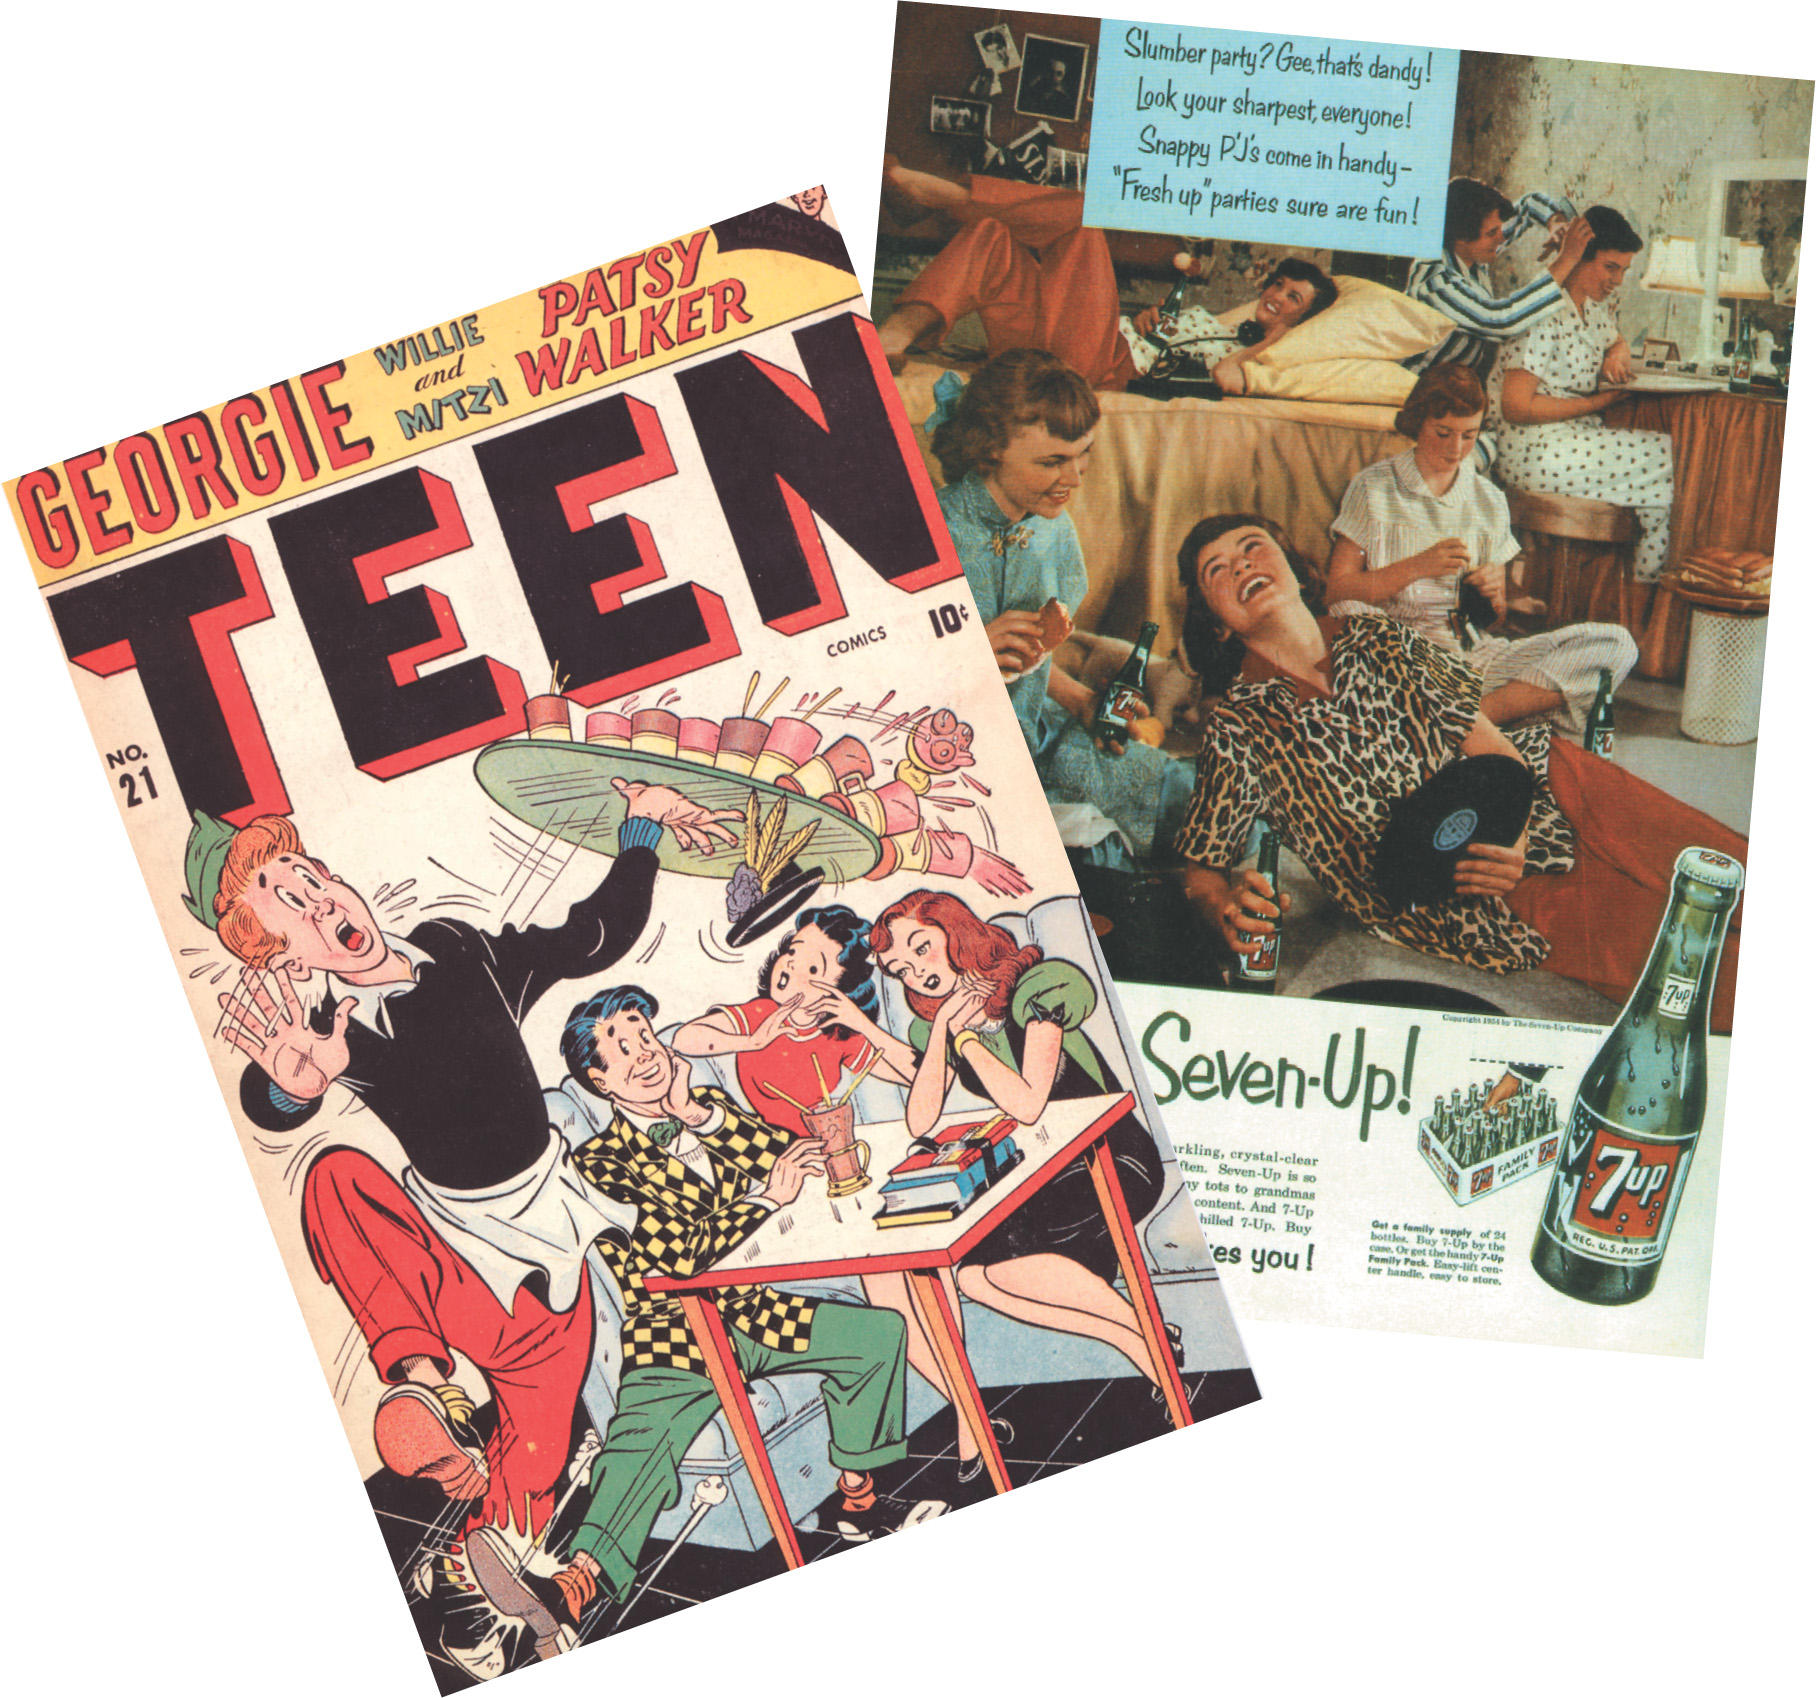 Teen Magazine cover and advertisement for 7-Up